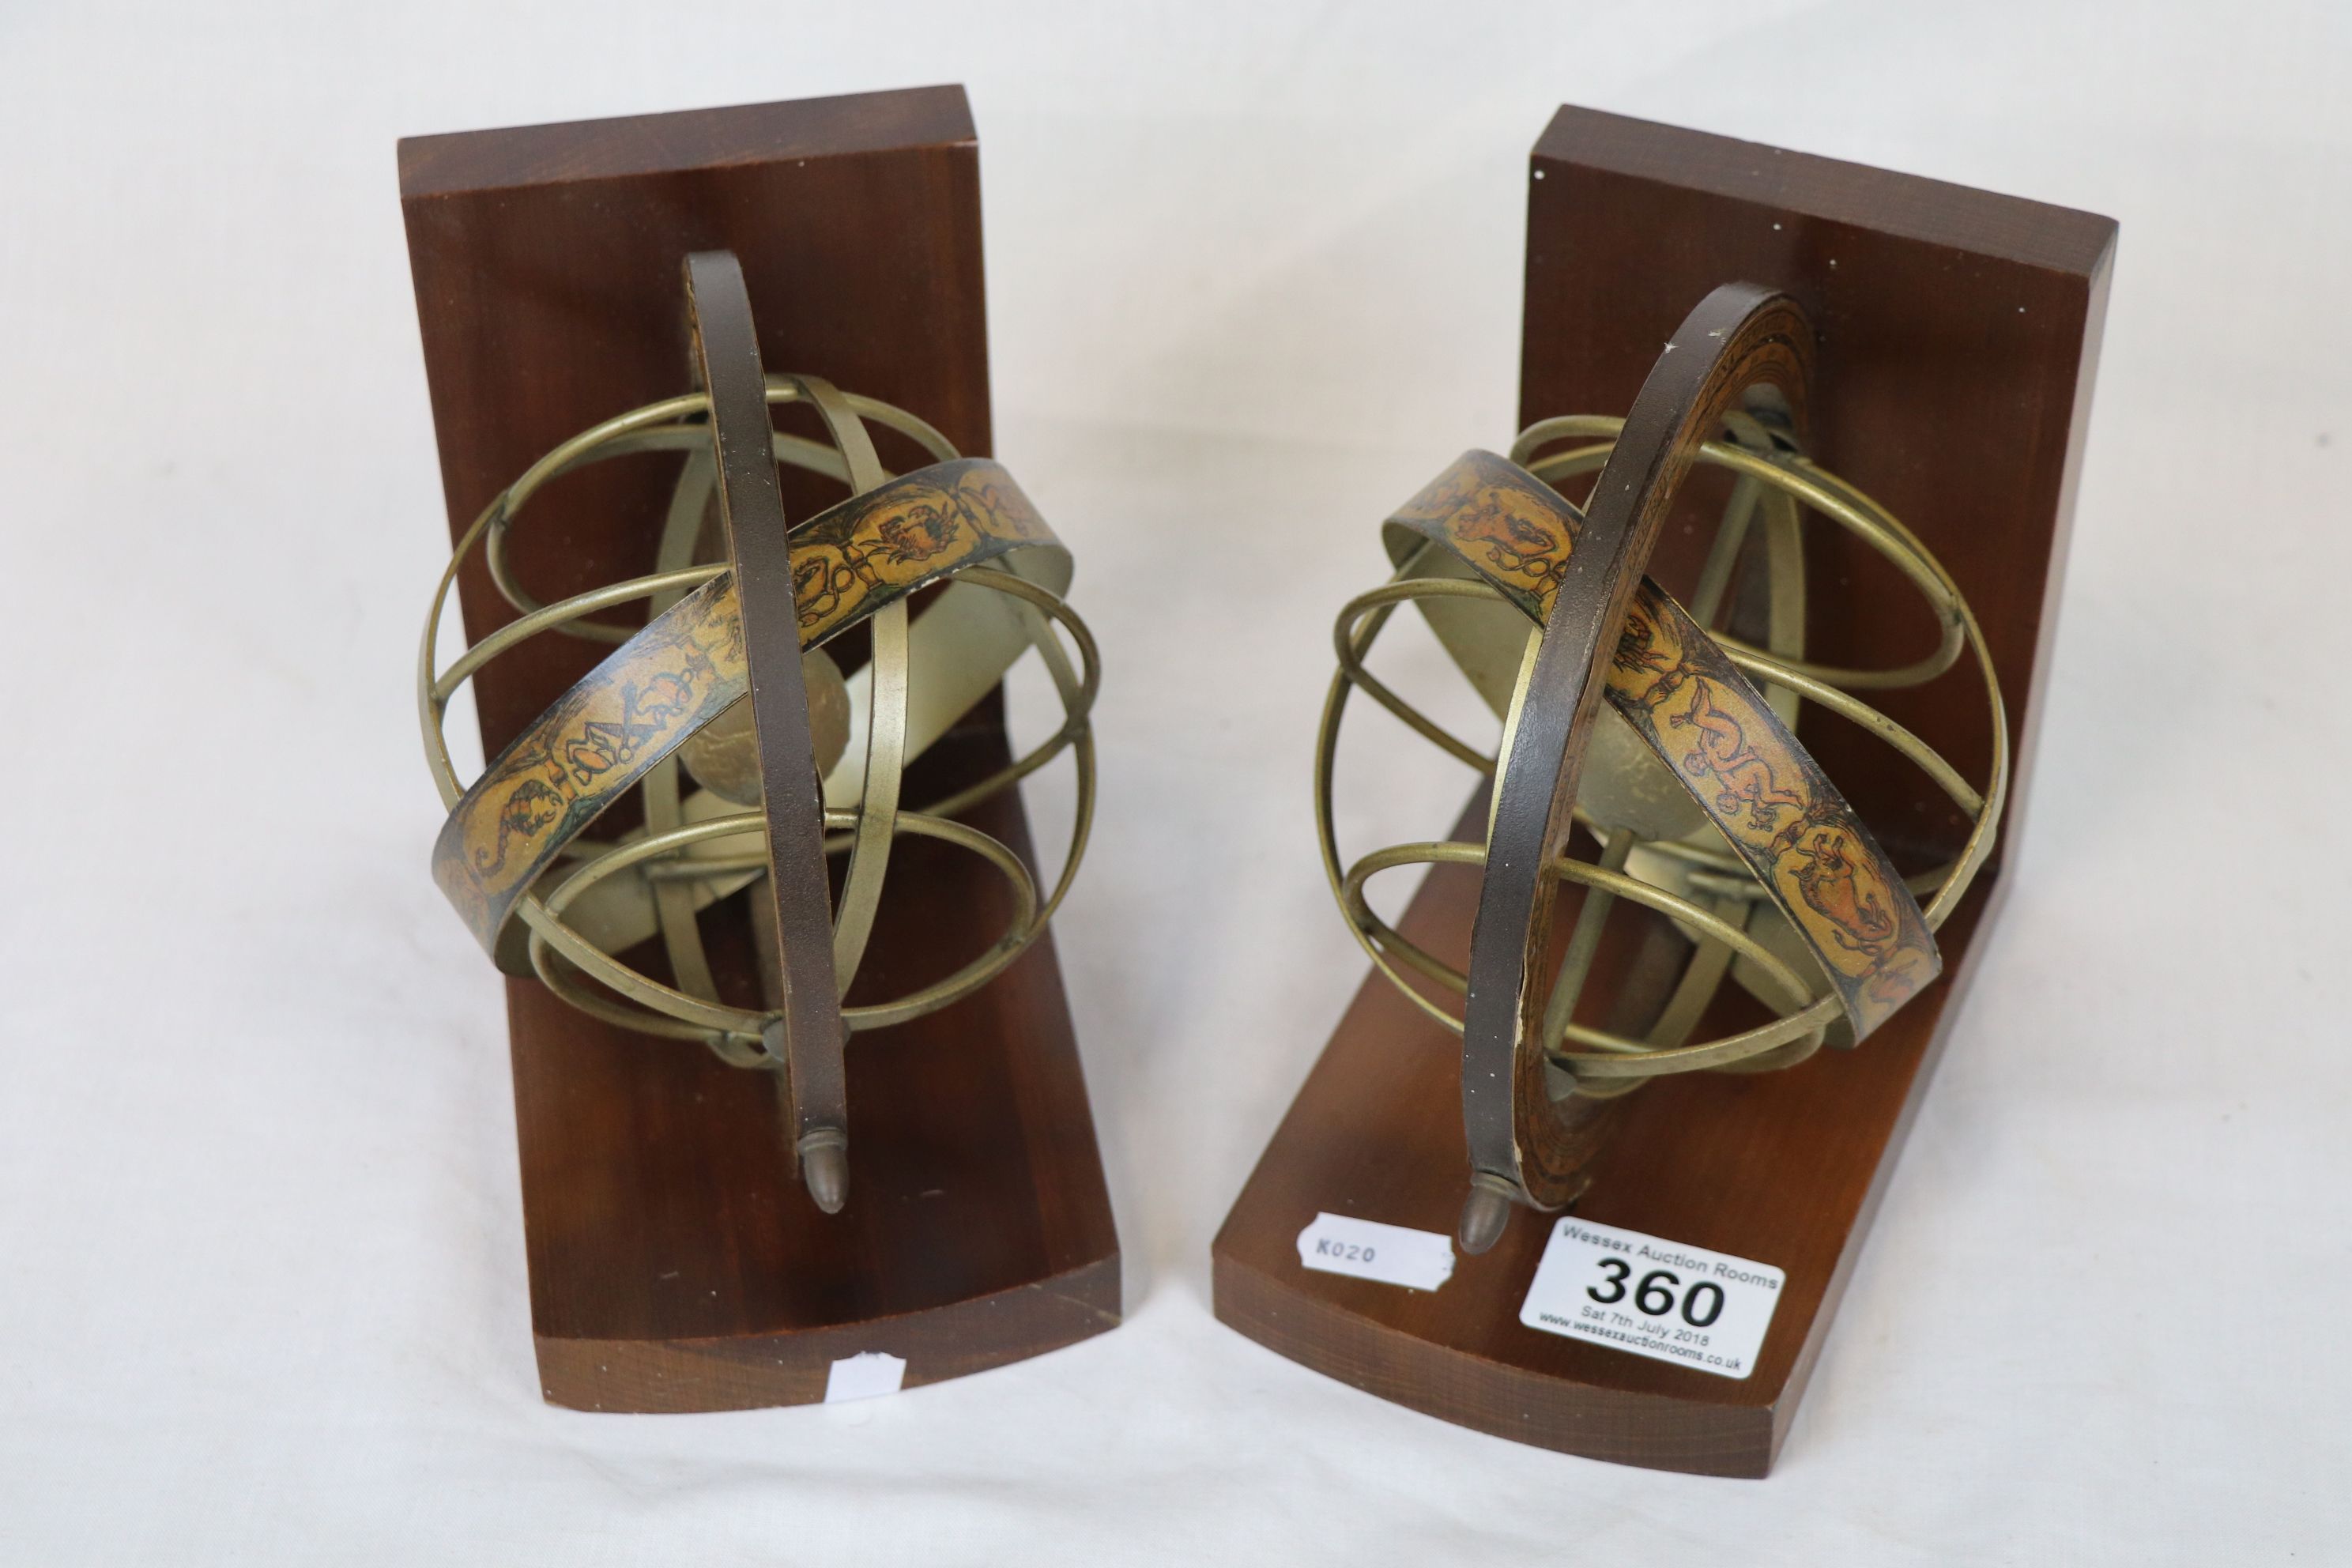 Pair of wooden Bookends with spinning Globe design